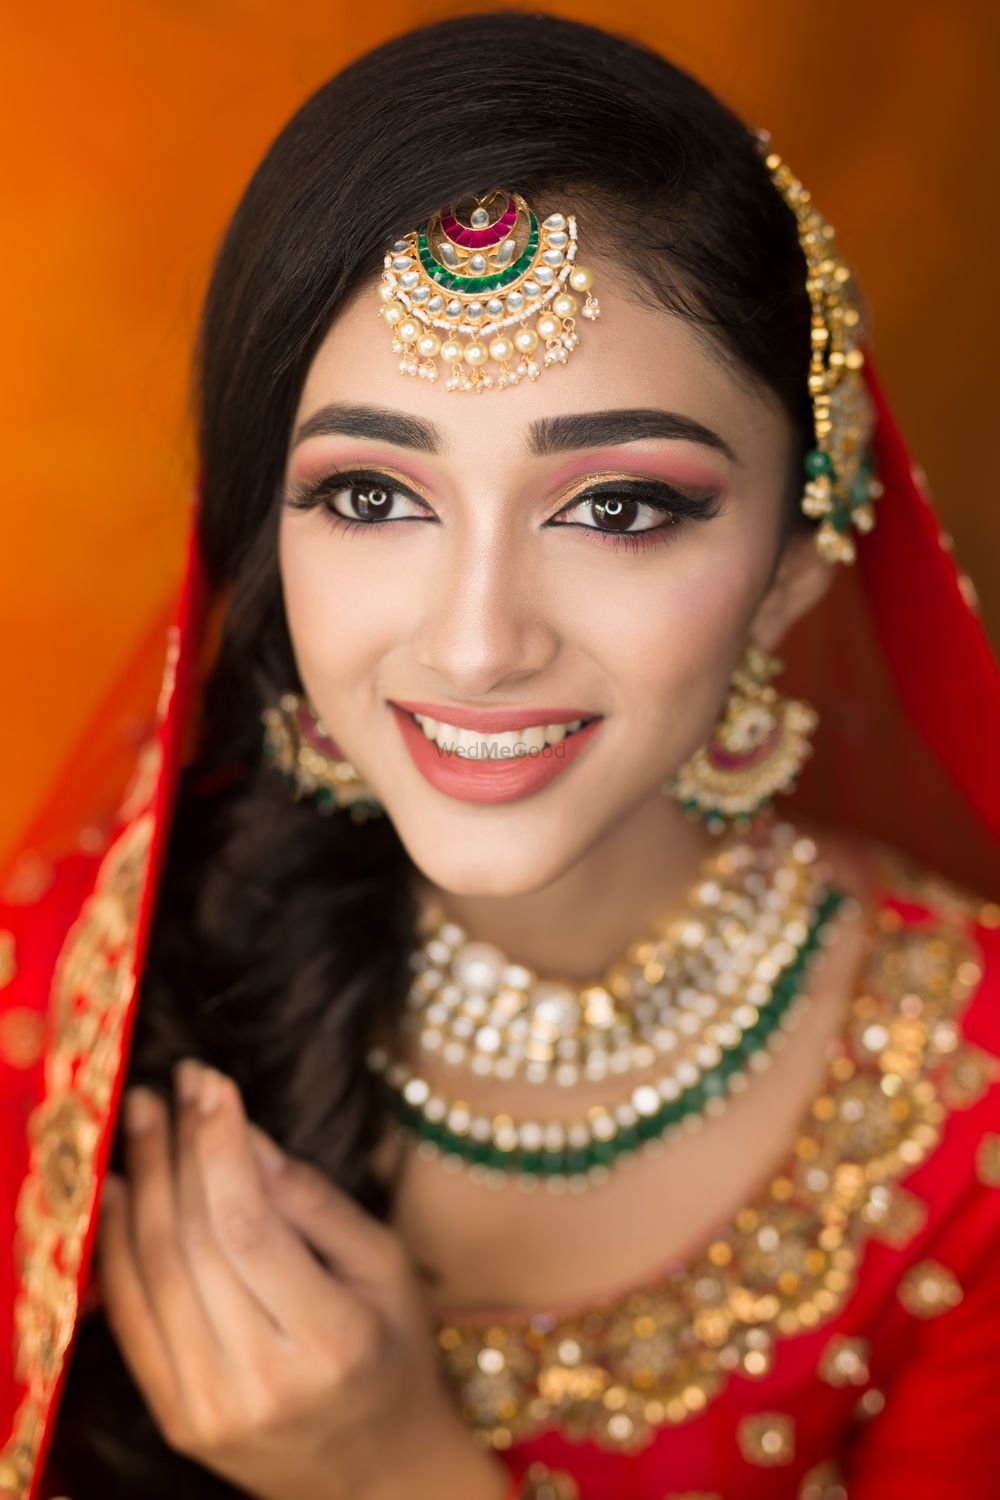 Photo From Bridal HD Makeup - By Makeup by Aamirah